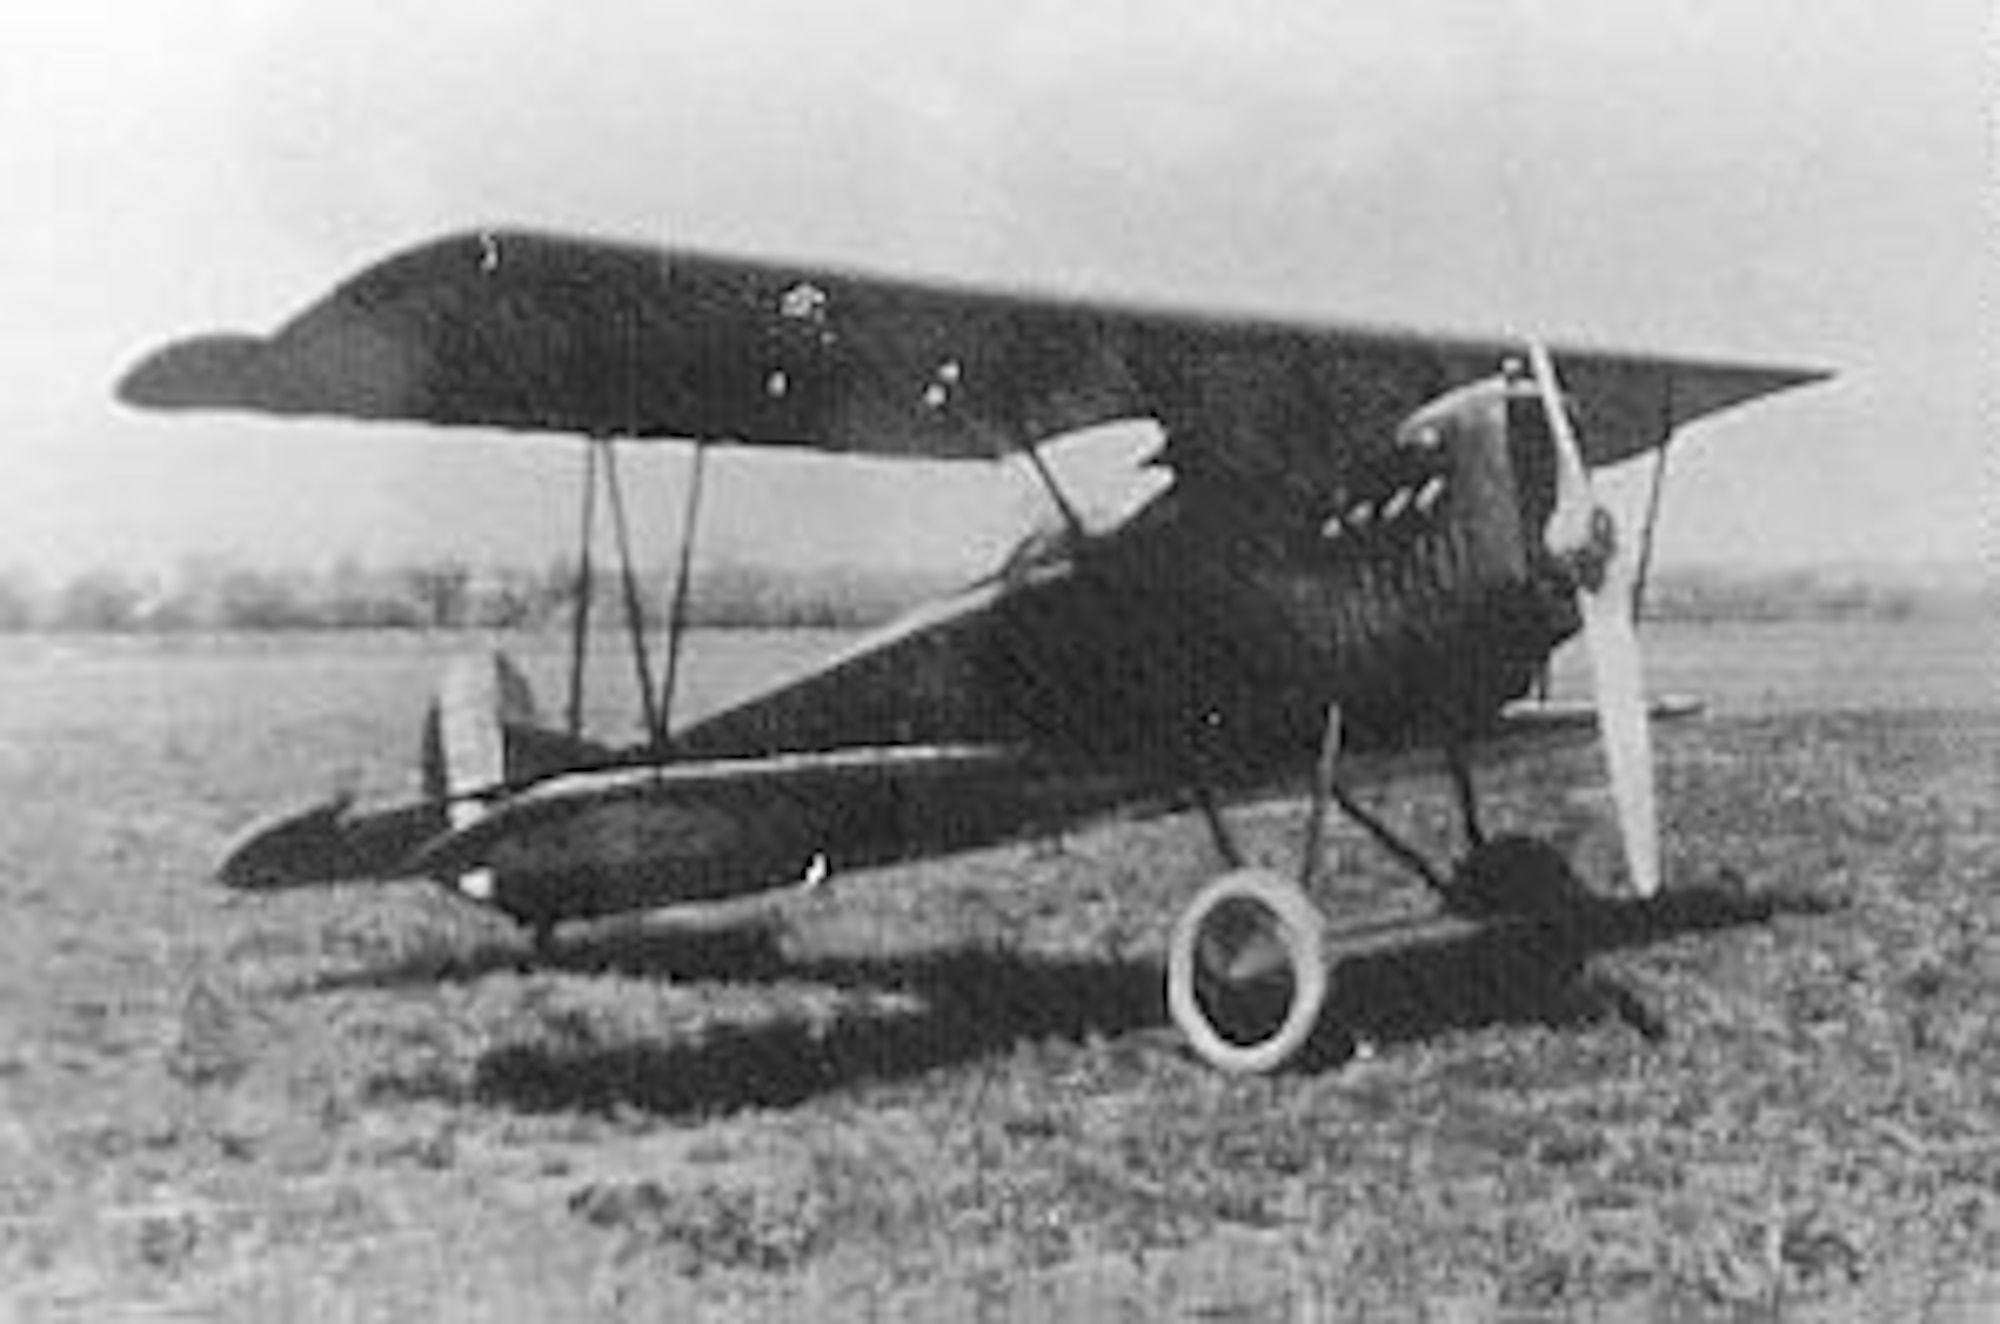 German Fokker D.VII from the World War I period. It was modified at McCook Field into a two-place airplane powered by a U.S.-built Packard engine. (U.S. Air Force photo)